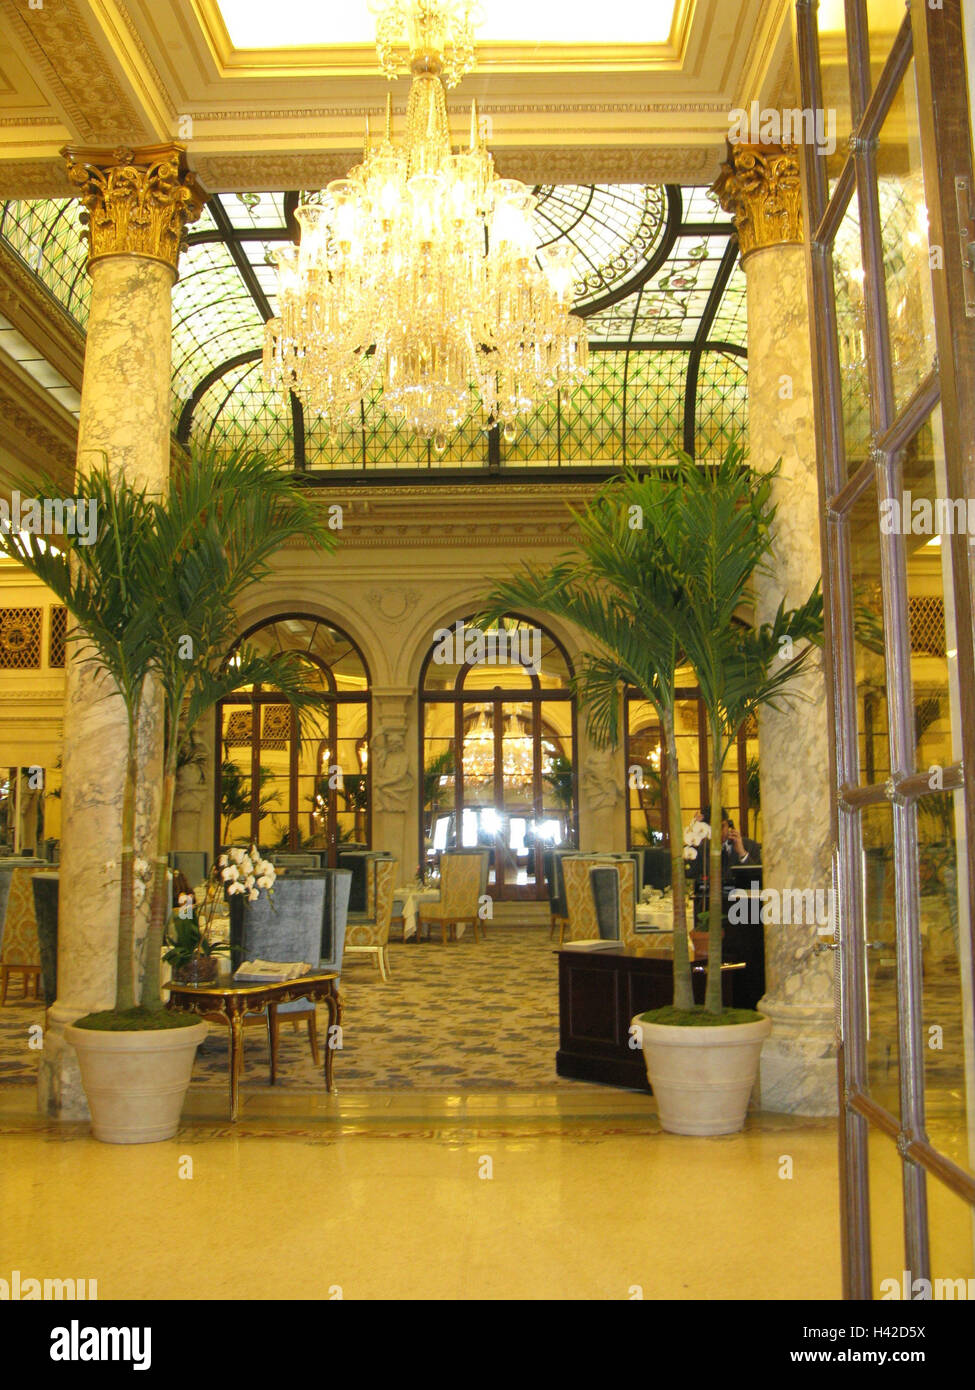 The USA, New York city, Manhattan, plaza Hotel, Russian Tea Room, North America, town, destination, building, structure, hotel business, architecture, hotel building, five-star hotel, luxury, high-class hotel, nobly, steeped in tradition, inside, palms, candlesticks, chandeliers, cafe, elegant, Stock Photo